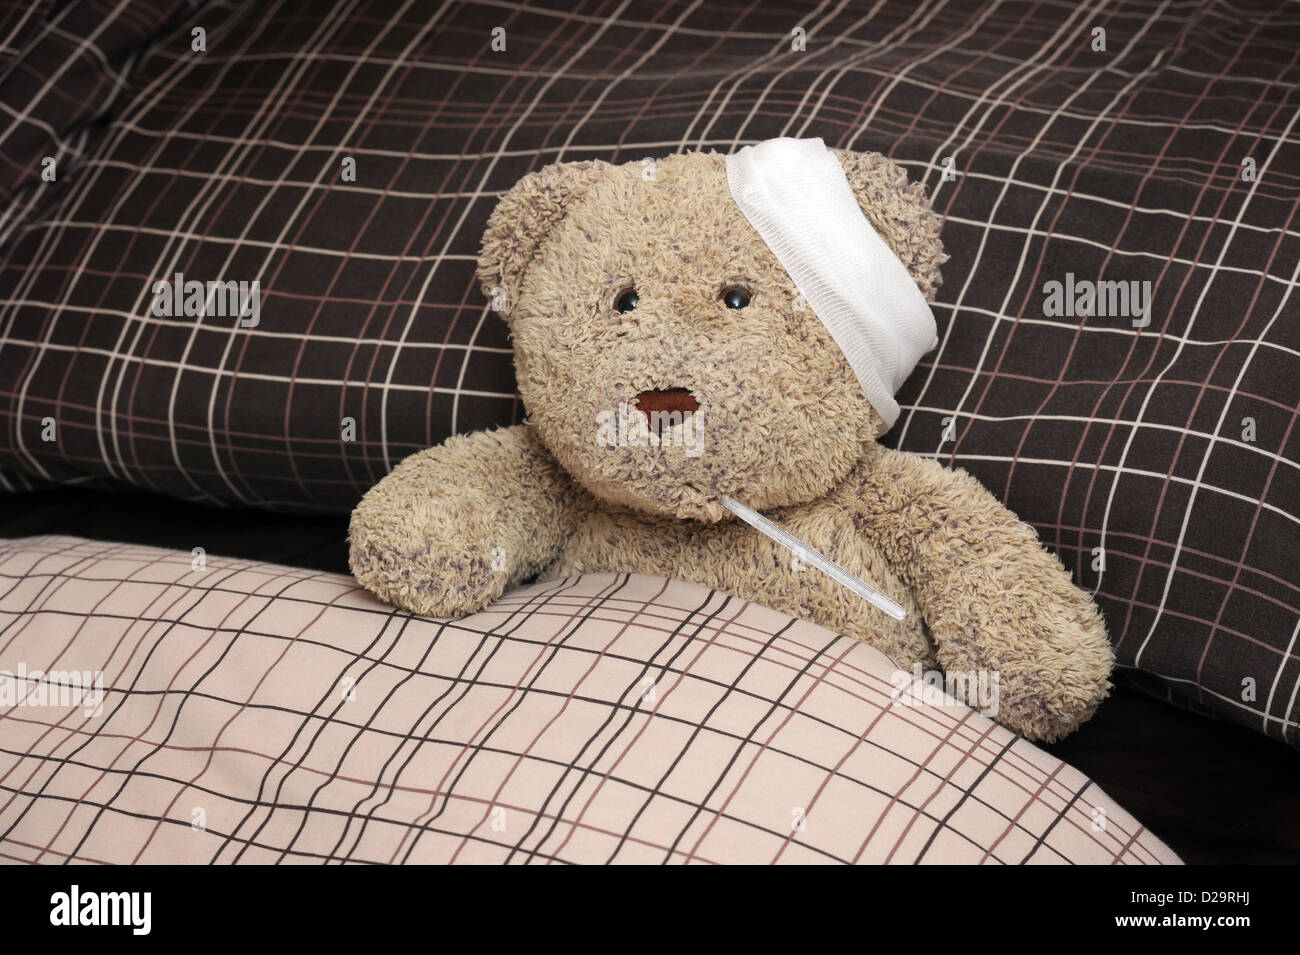 TEDDY BEAR IN BED WITH BANDAGE AND THERMOMETER RE ILLNESS MAN FLU SICKNESS THROWING A SICKIE TIME OFF WORK WORKERS DAY WELL UK Stock Photo